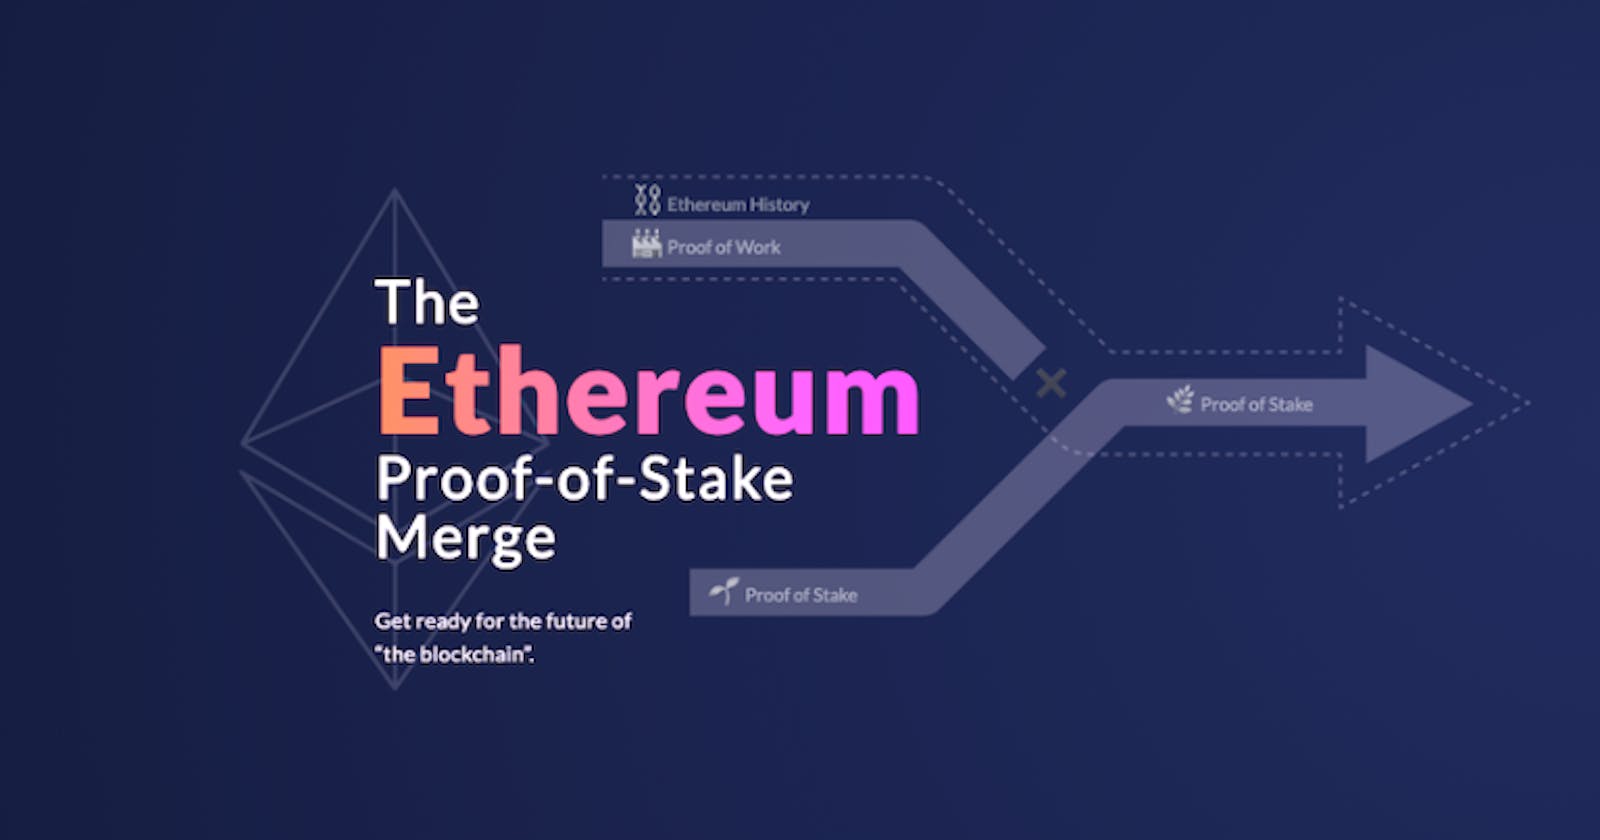 The Ethereum Proof-of-stake Merge